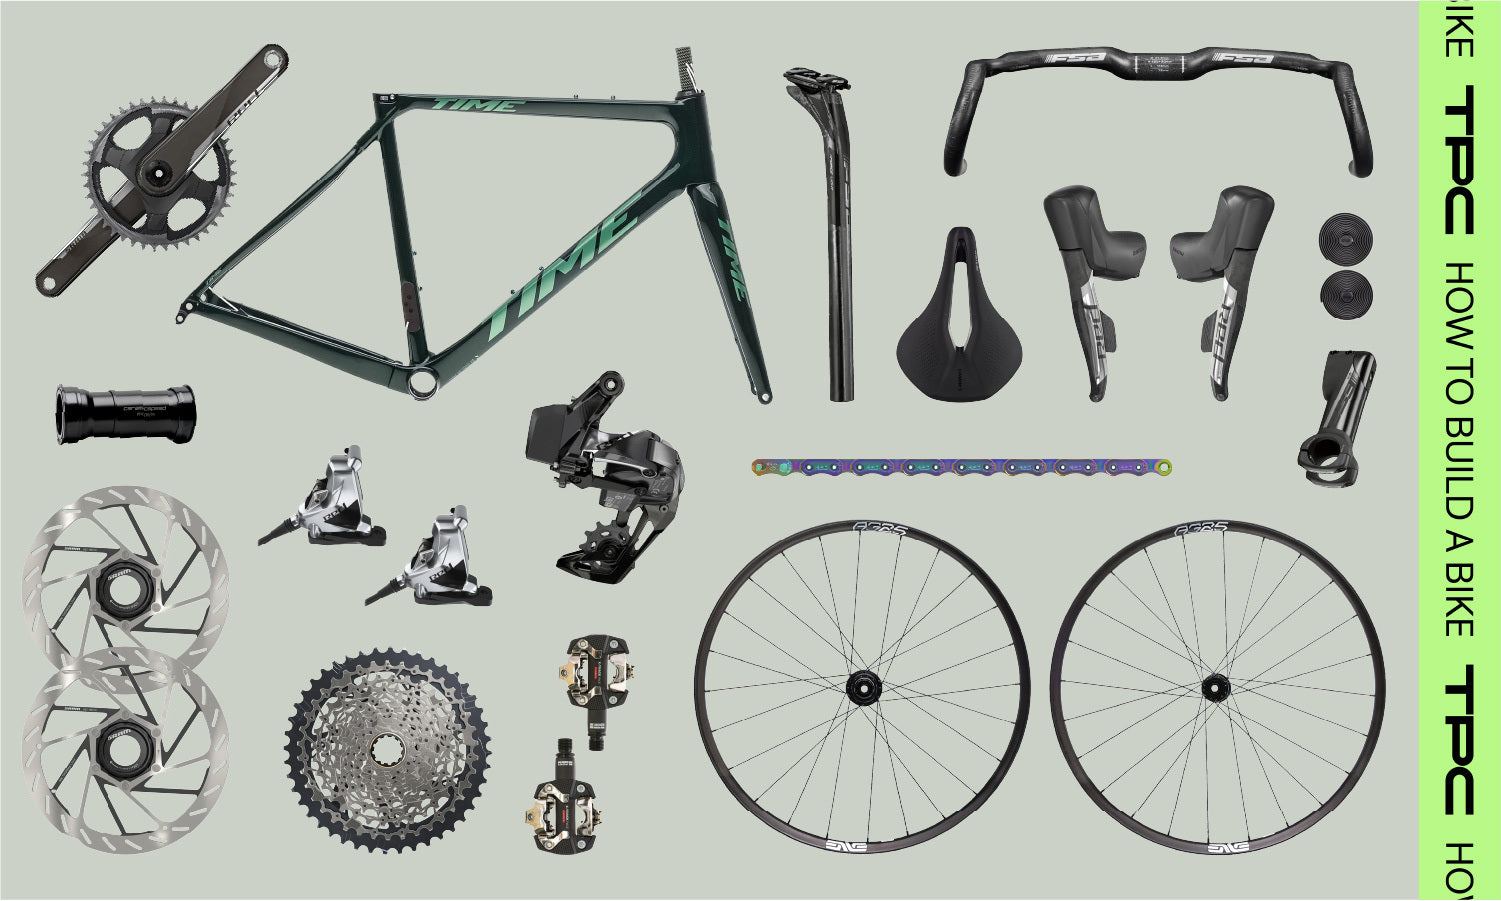 How To Build A Bike From the Frame Up, Plus Pros and Cons of Custom Online Builds The Pros Closet